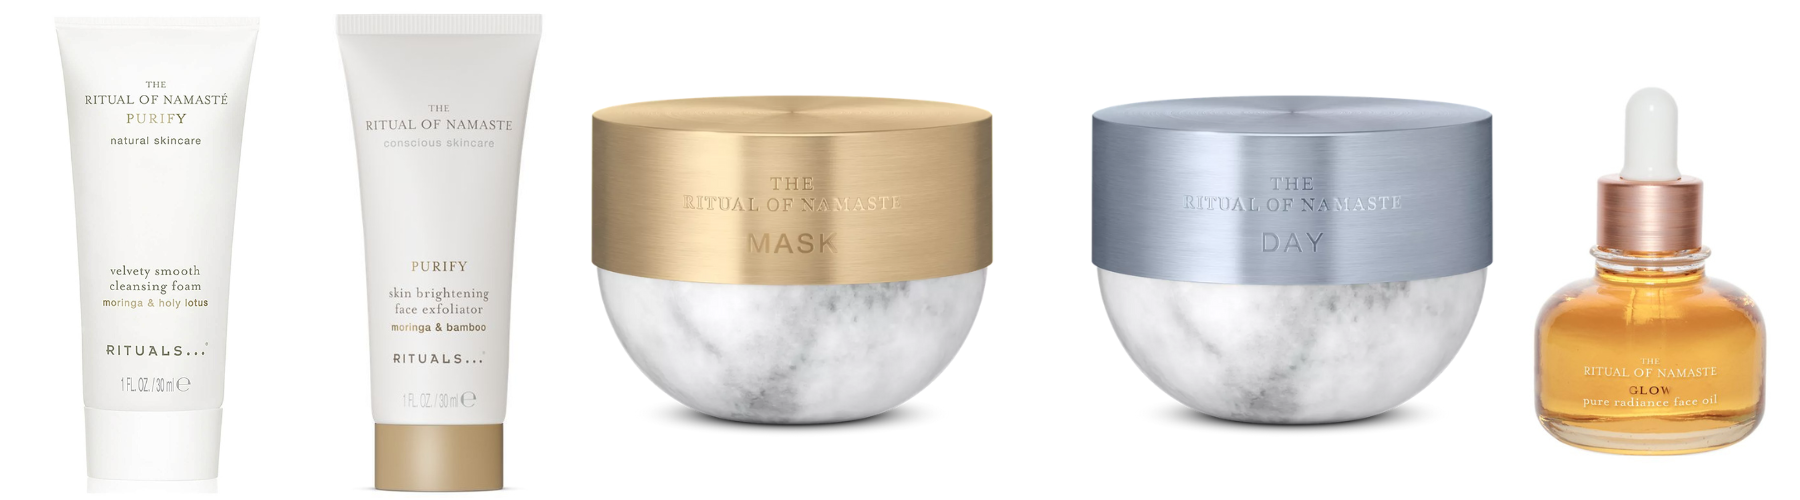 Rituals Skincare (100+ products) compare price now »